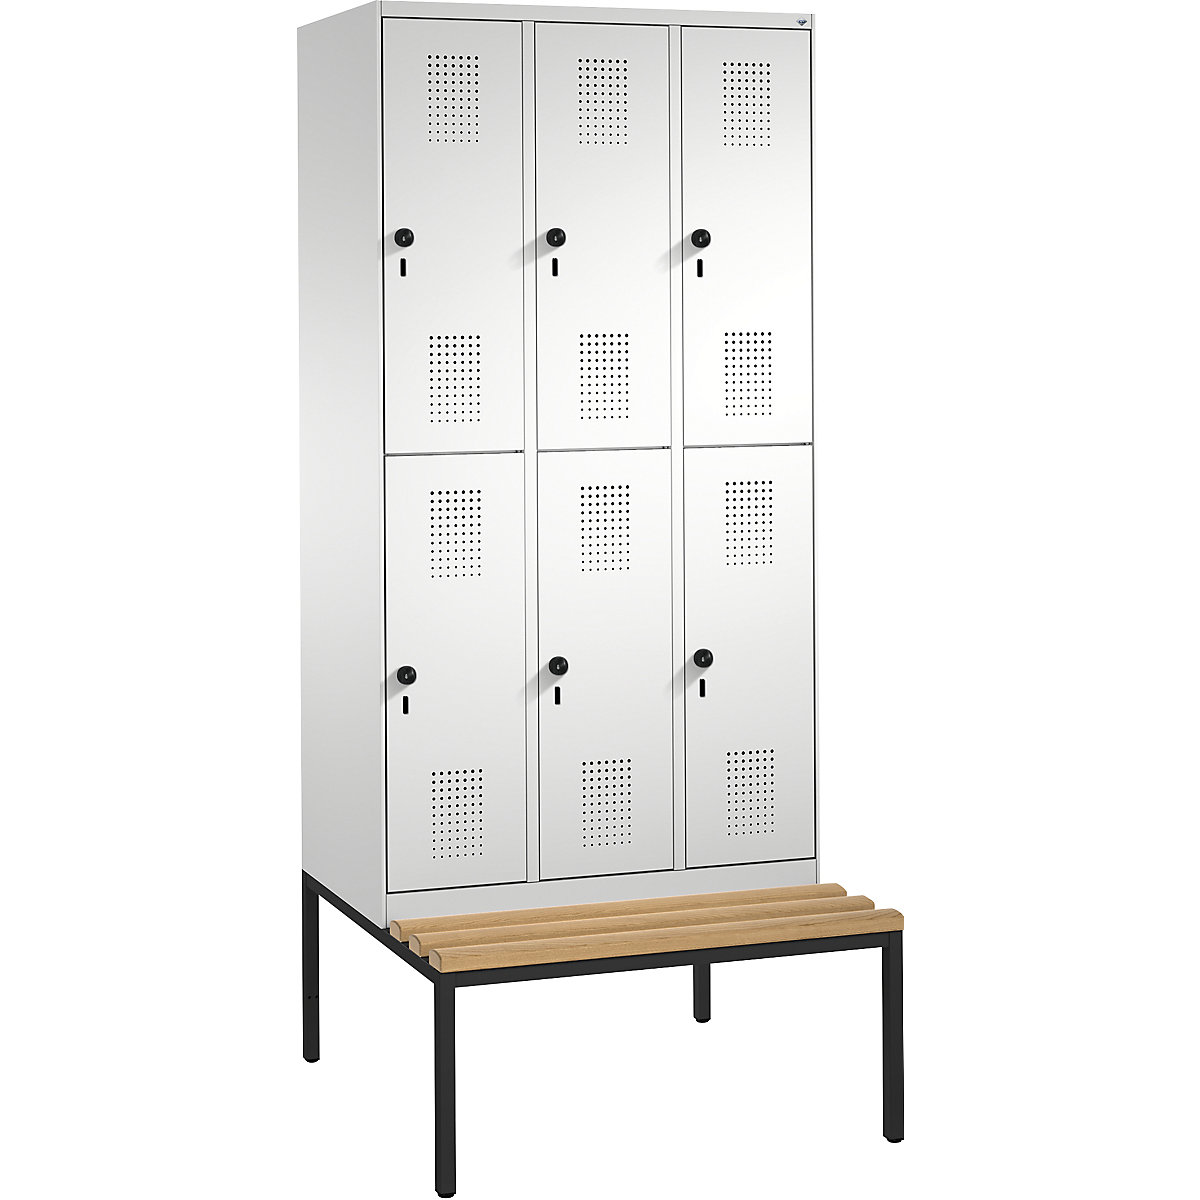 EVOLO cloakroom locker, double tier, with bench – C+P, 3 compartments, 2 shelf compartments each, compartment width 300 mm, light grey-6